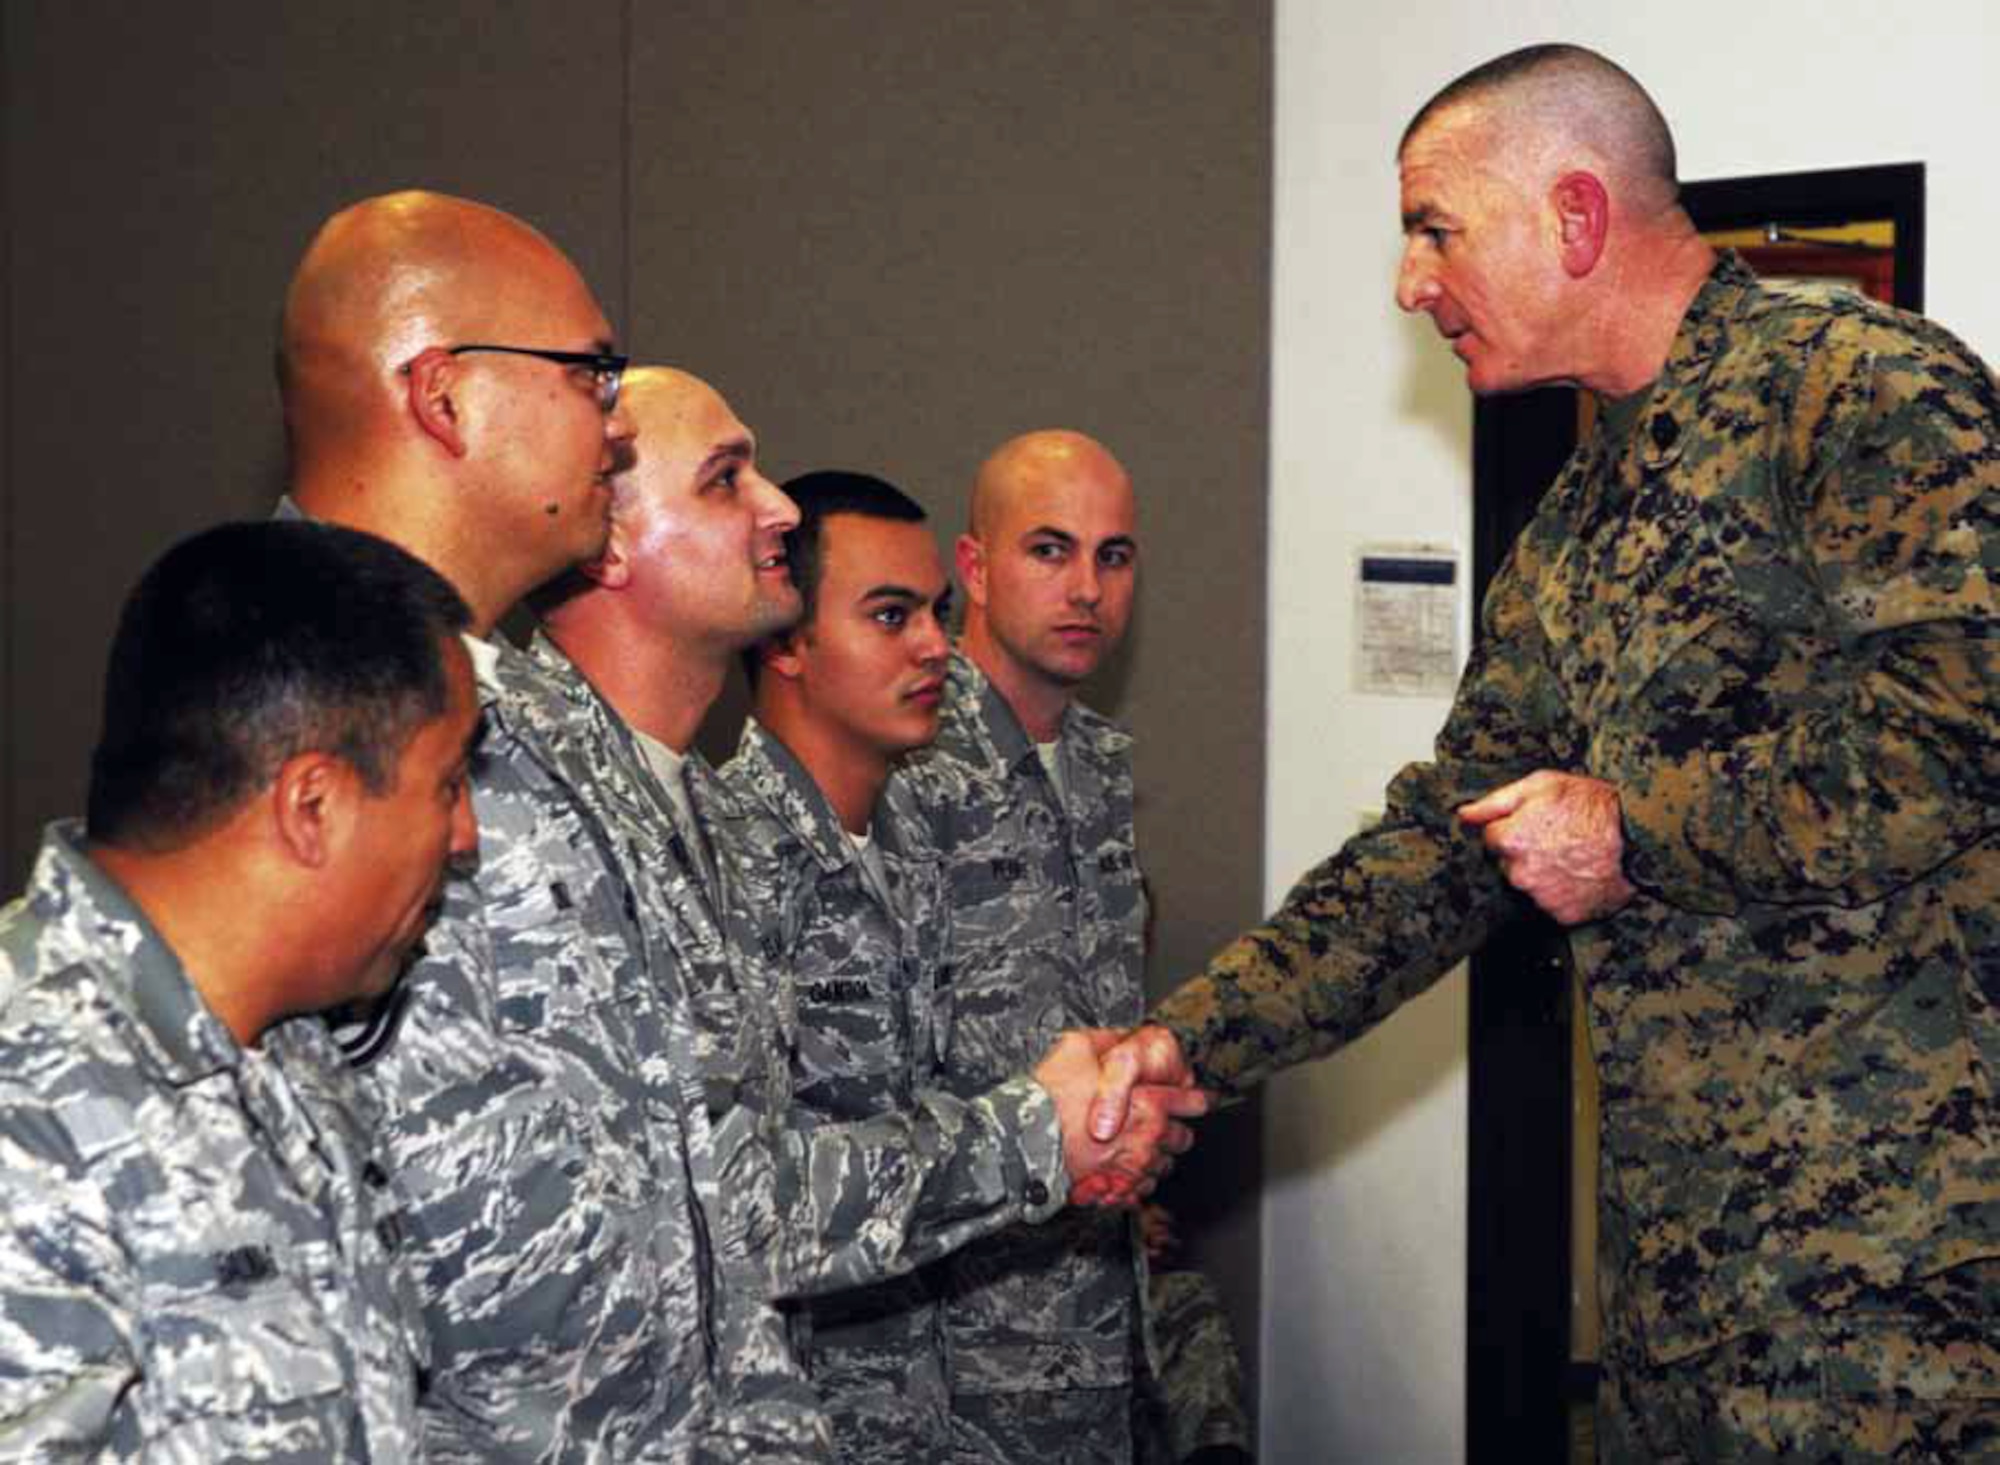 The Senior Enlisted Advisor to the Chairman, Joint Chiefs of Staff, U.S. Marine Sergeant Major Bryan Battalia, greets Airmen stationed at March Air Reserve Base, Jan. 11. The U.S. Armed Forces’ top enlisted member engaged with audience members on subjects pertaining to the CJCS’s doctrine entitled, “Vision 2020,” detailing his vision of the total military family, renewing commitment and better understanding the way forward if drastic cuts are made to the military budget. (U.S. Air National Guard photo by Staff Sgt. Mykel Anderson)